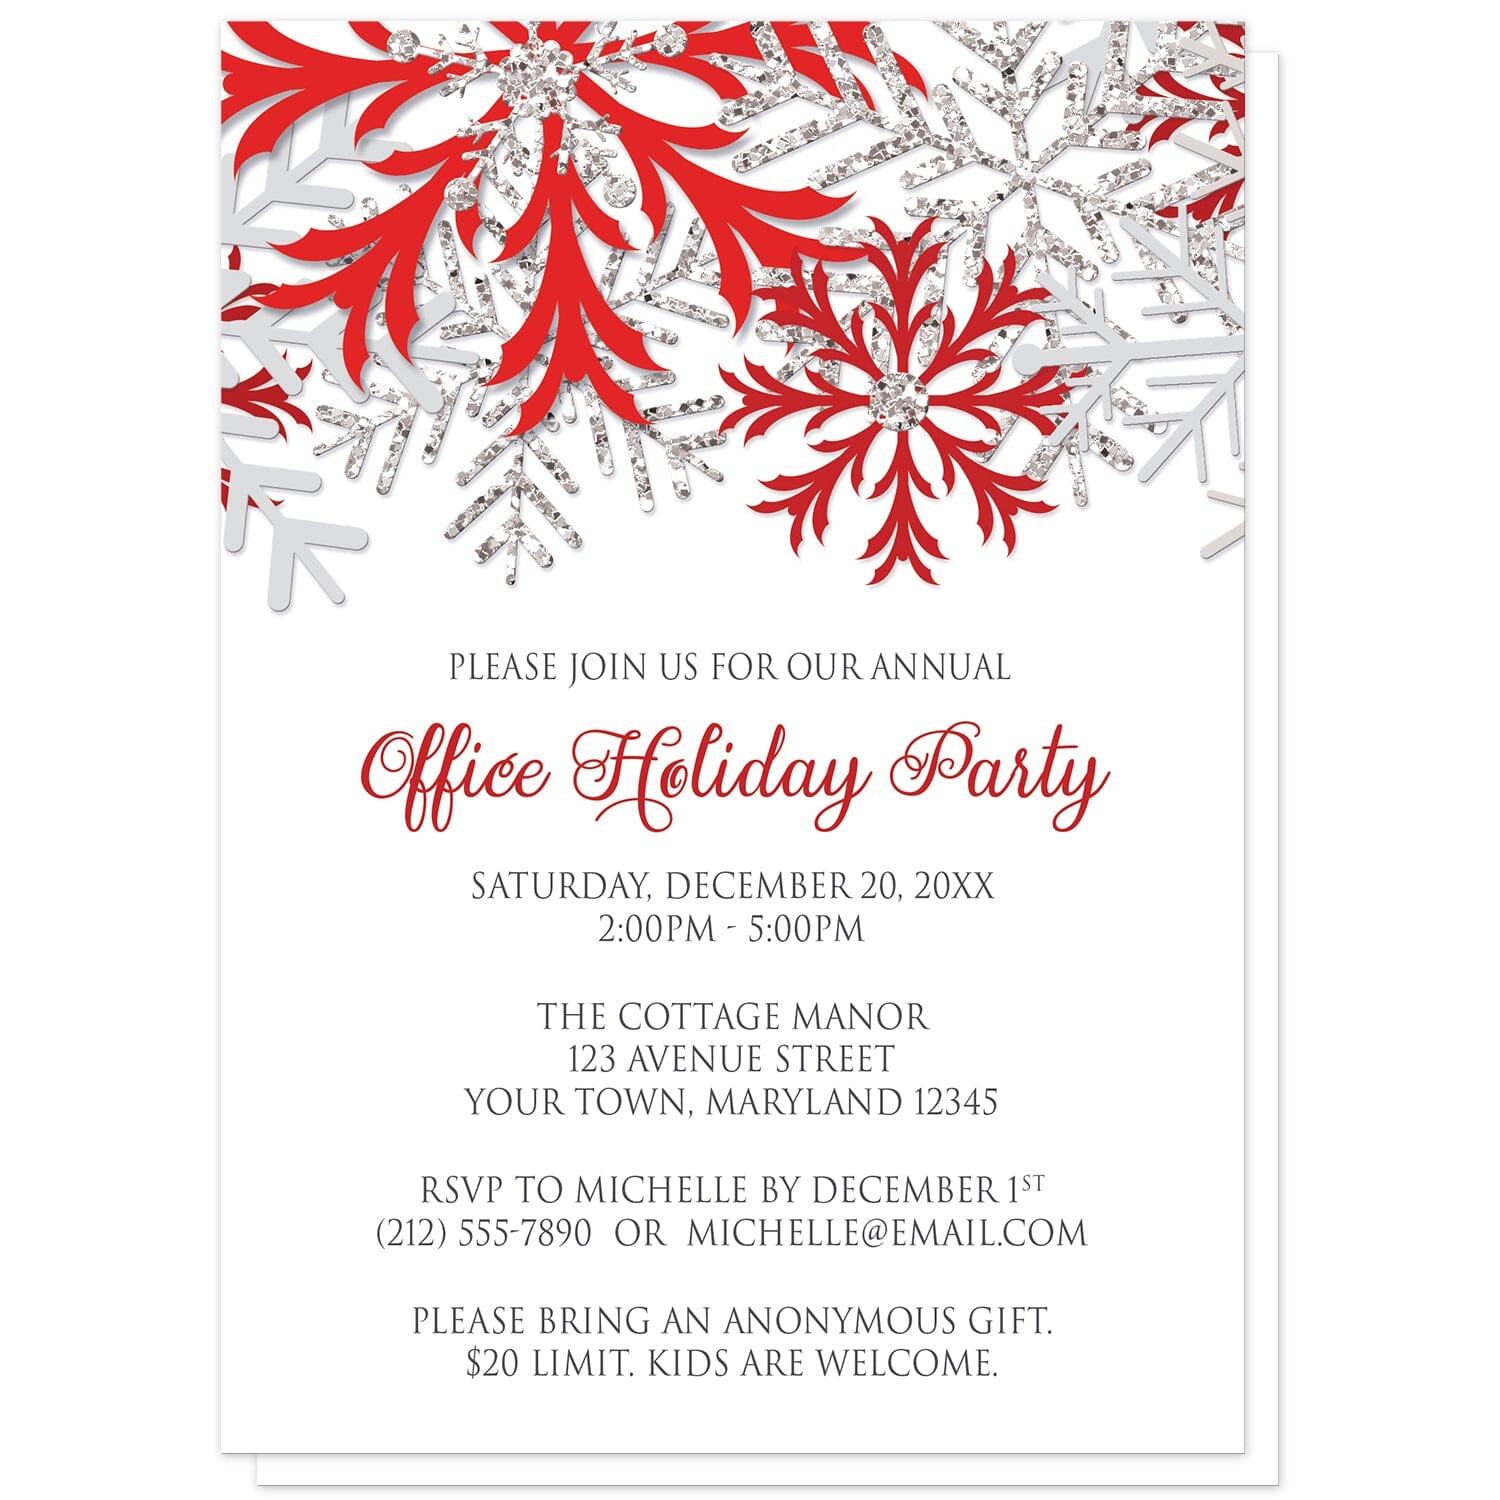 Winter Red Silver Snowflake Holiday Party Invitations at Artistically Invited. Winter red silver snowflake holiday party invitations with red, darker red, and silver-colored glitter-illustrated snowflakes over a white background. Your personalized party details for your home or office party are custom printed in gray and red. The occasion title is printed in a whimsical red script font while your remaining details are printed in an all-capital letters gray serif font.